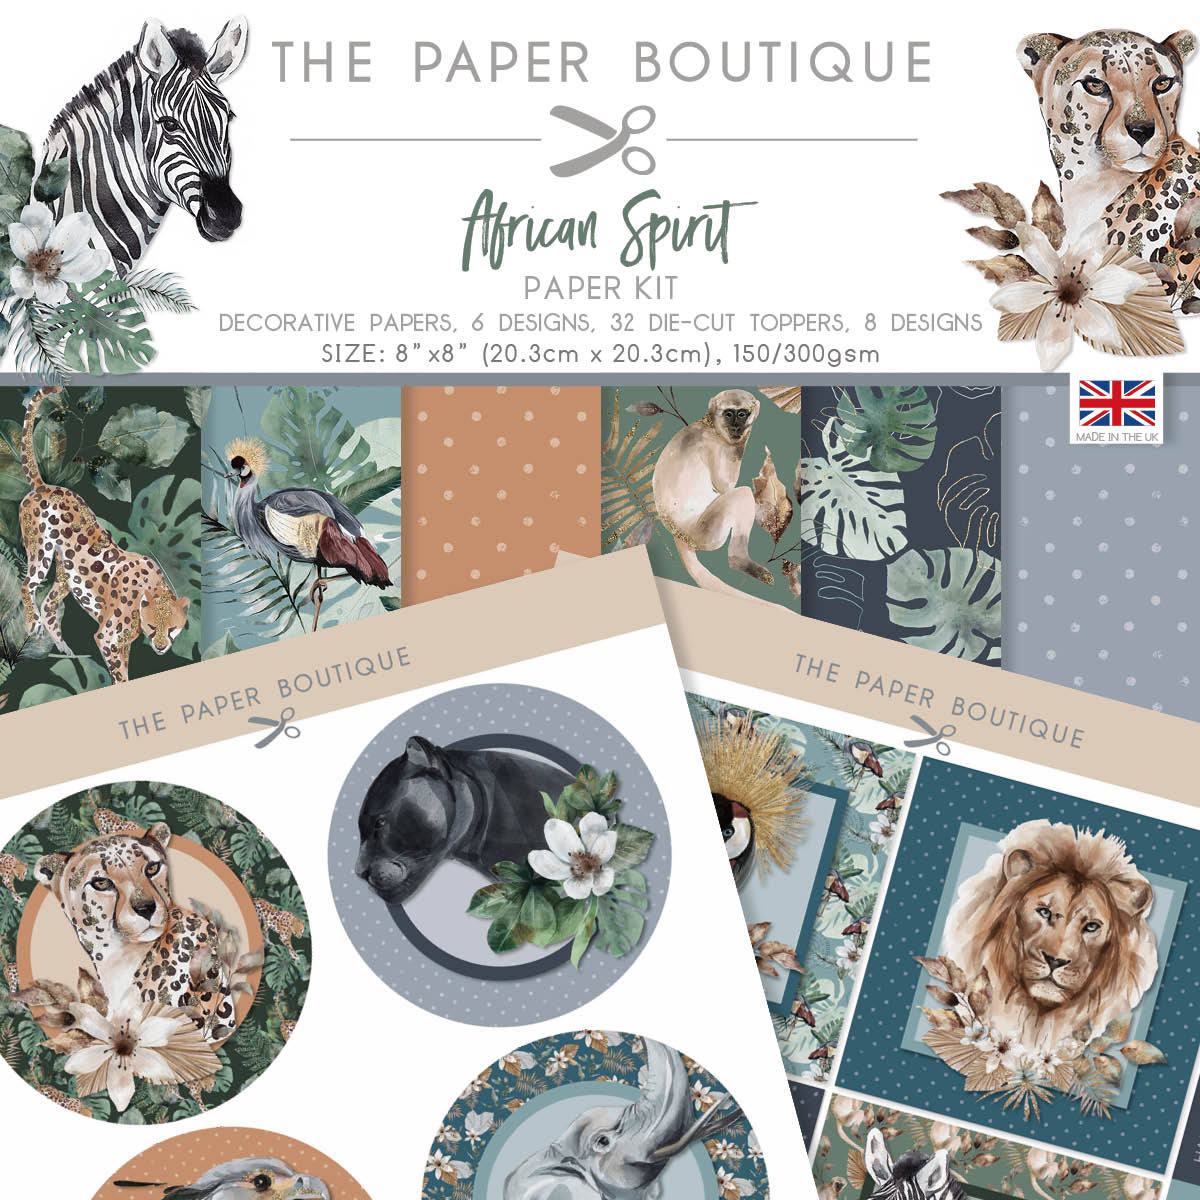 The Paper Boutique African Spirit Paper Kit